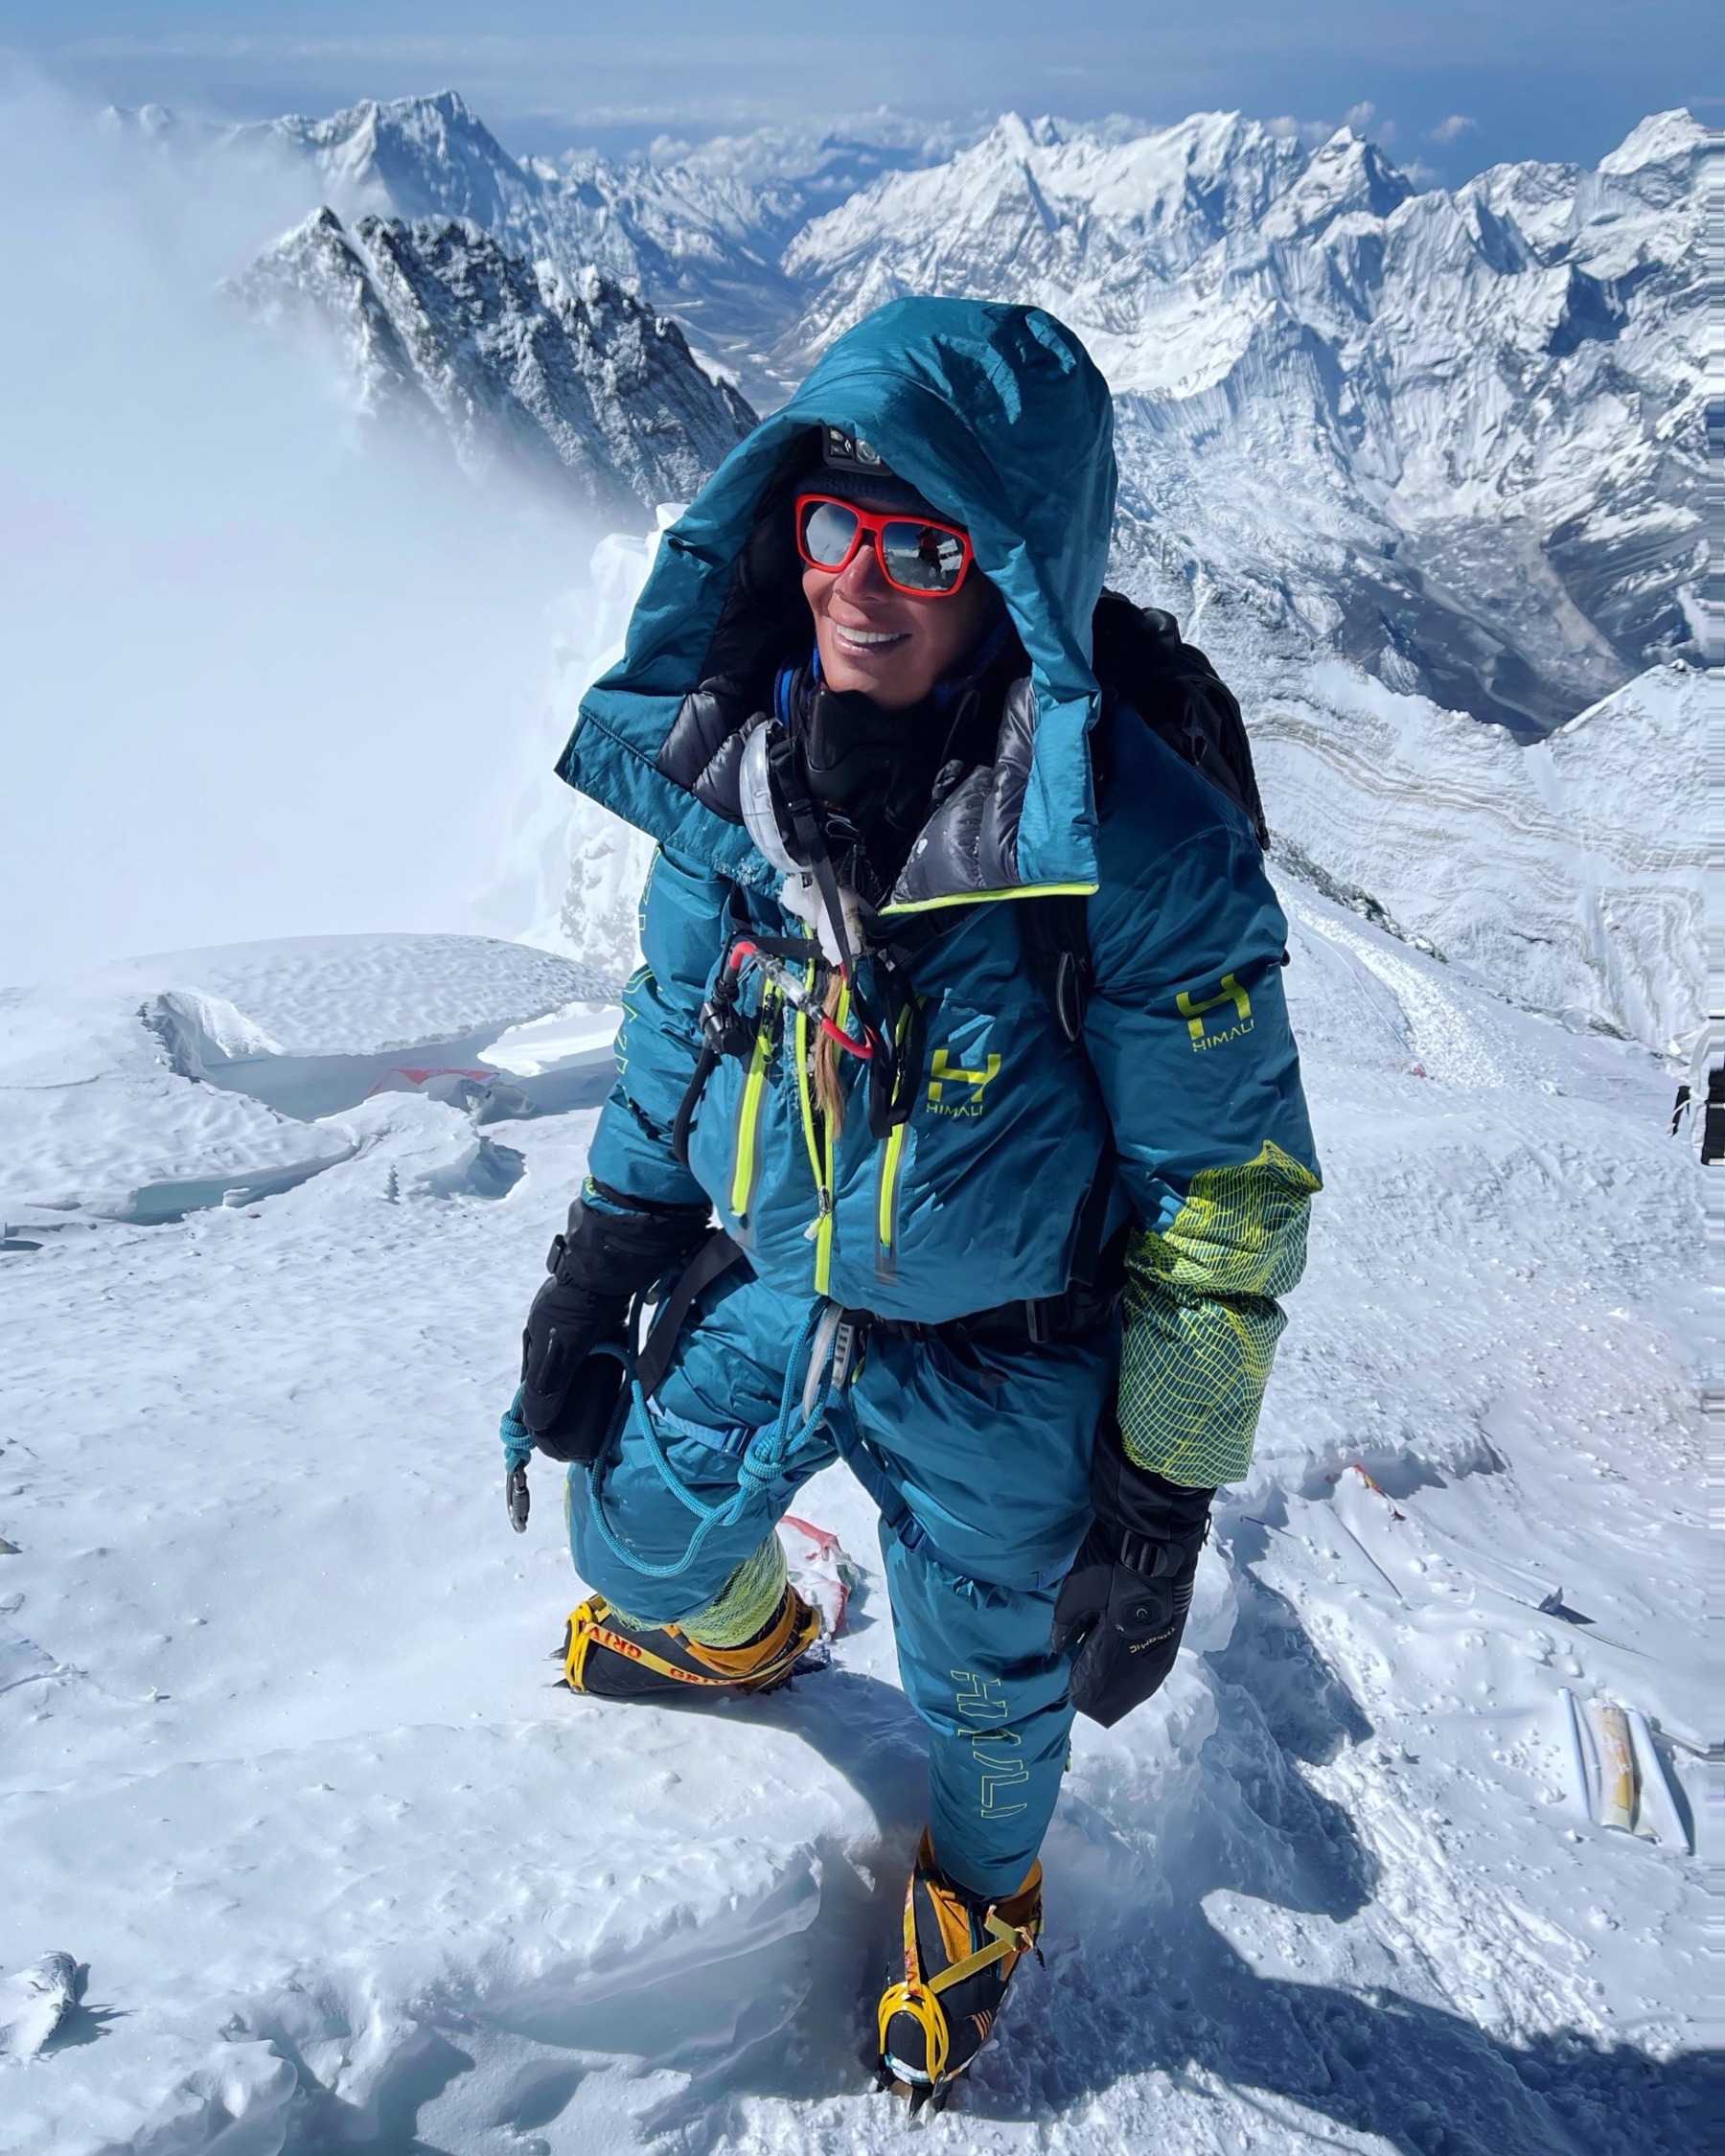 Kirsty Mack is stood on snow surrounded by mountains as she hikes up Everest. She's wearing goggles, gloves, blue trousers and a blue winter jacket. She smiles at the camera.